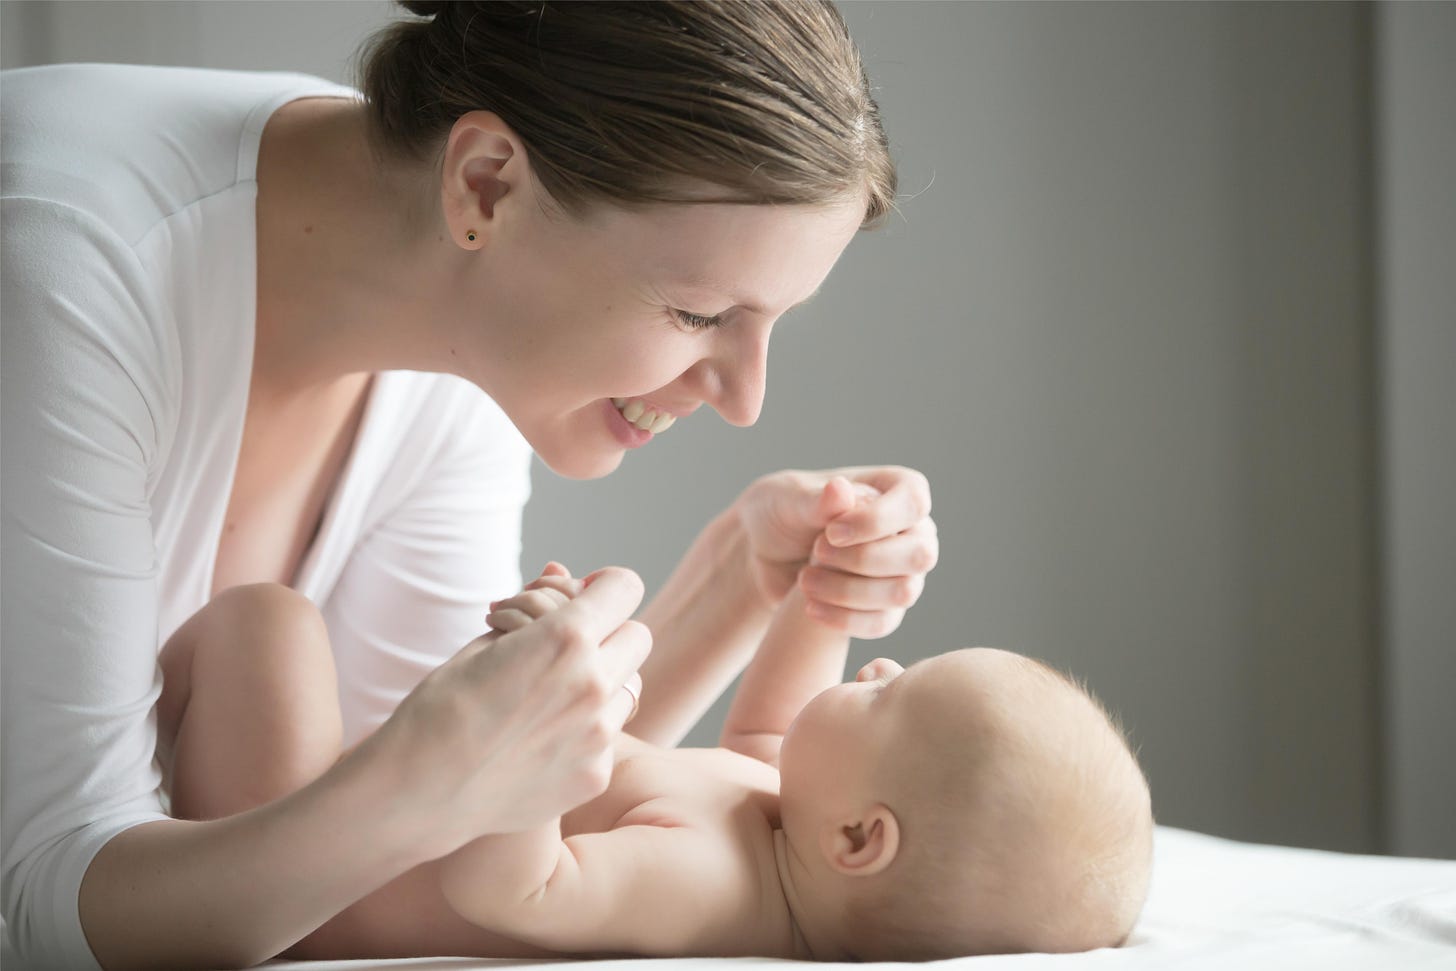 A mother is gently massaging her infant